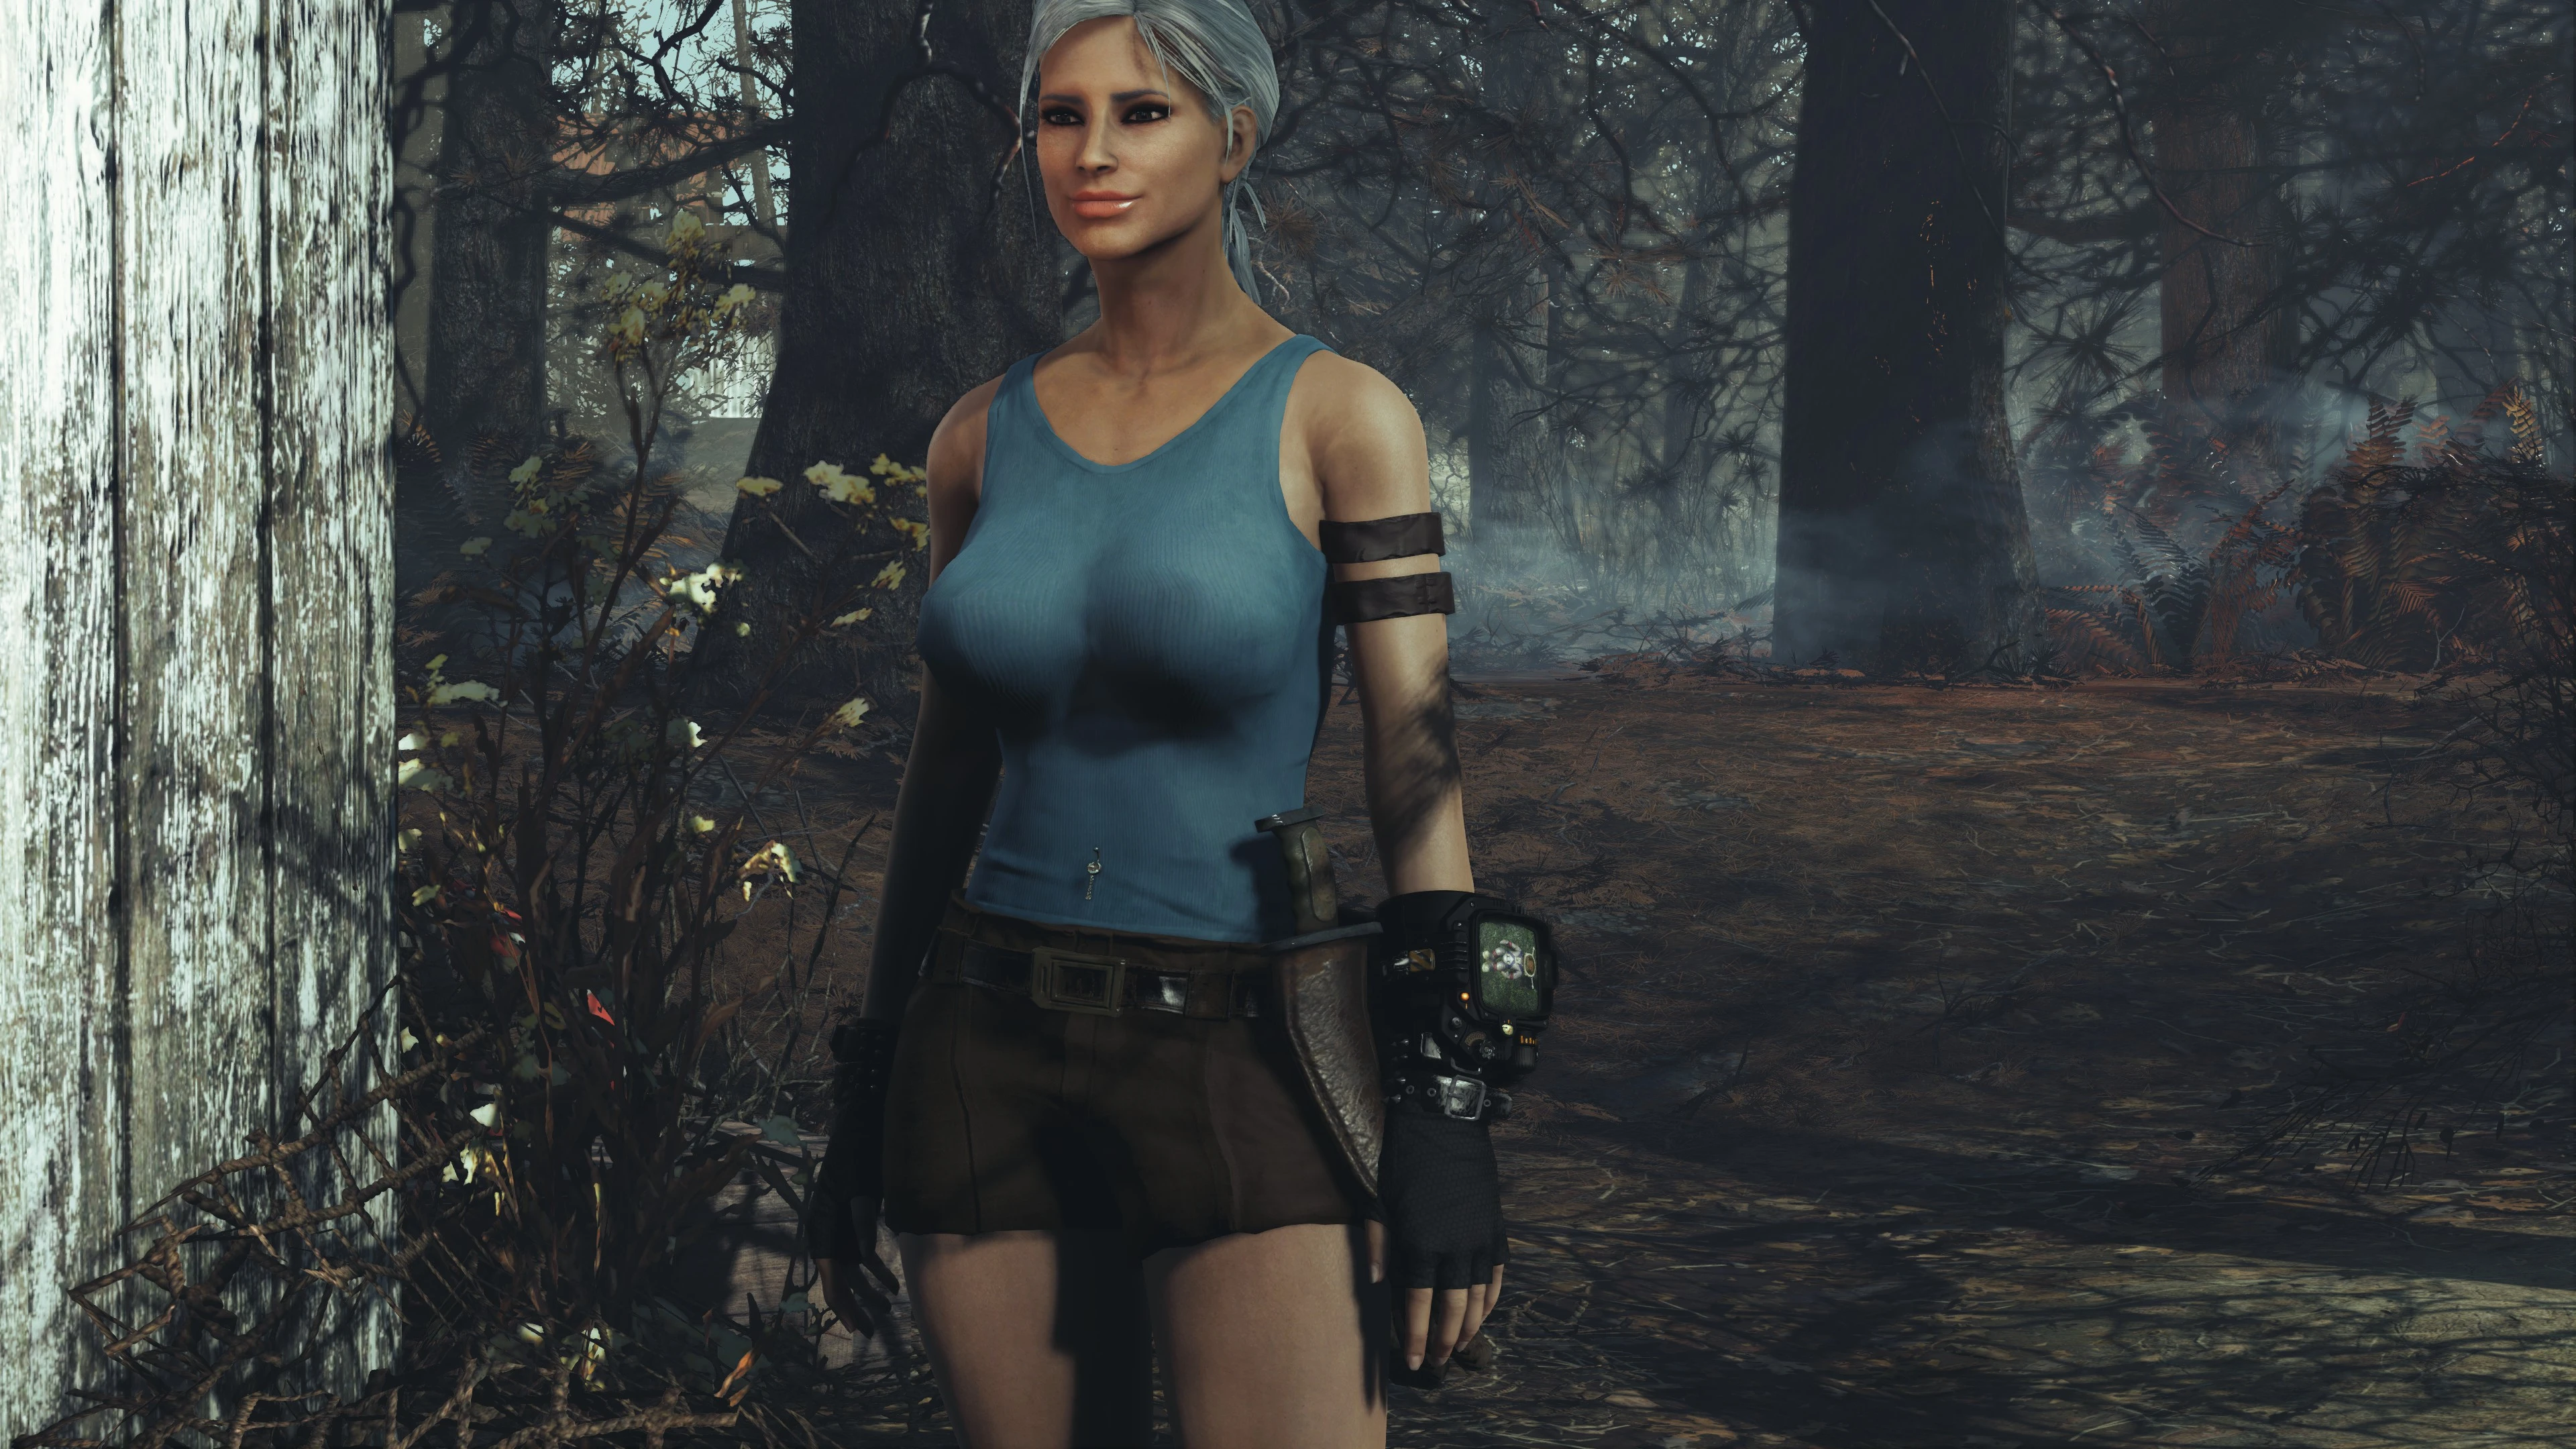 Tomb Raider Outfits (EVB-CBBE) (AE-AWKCR) at Fallout 4 